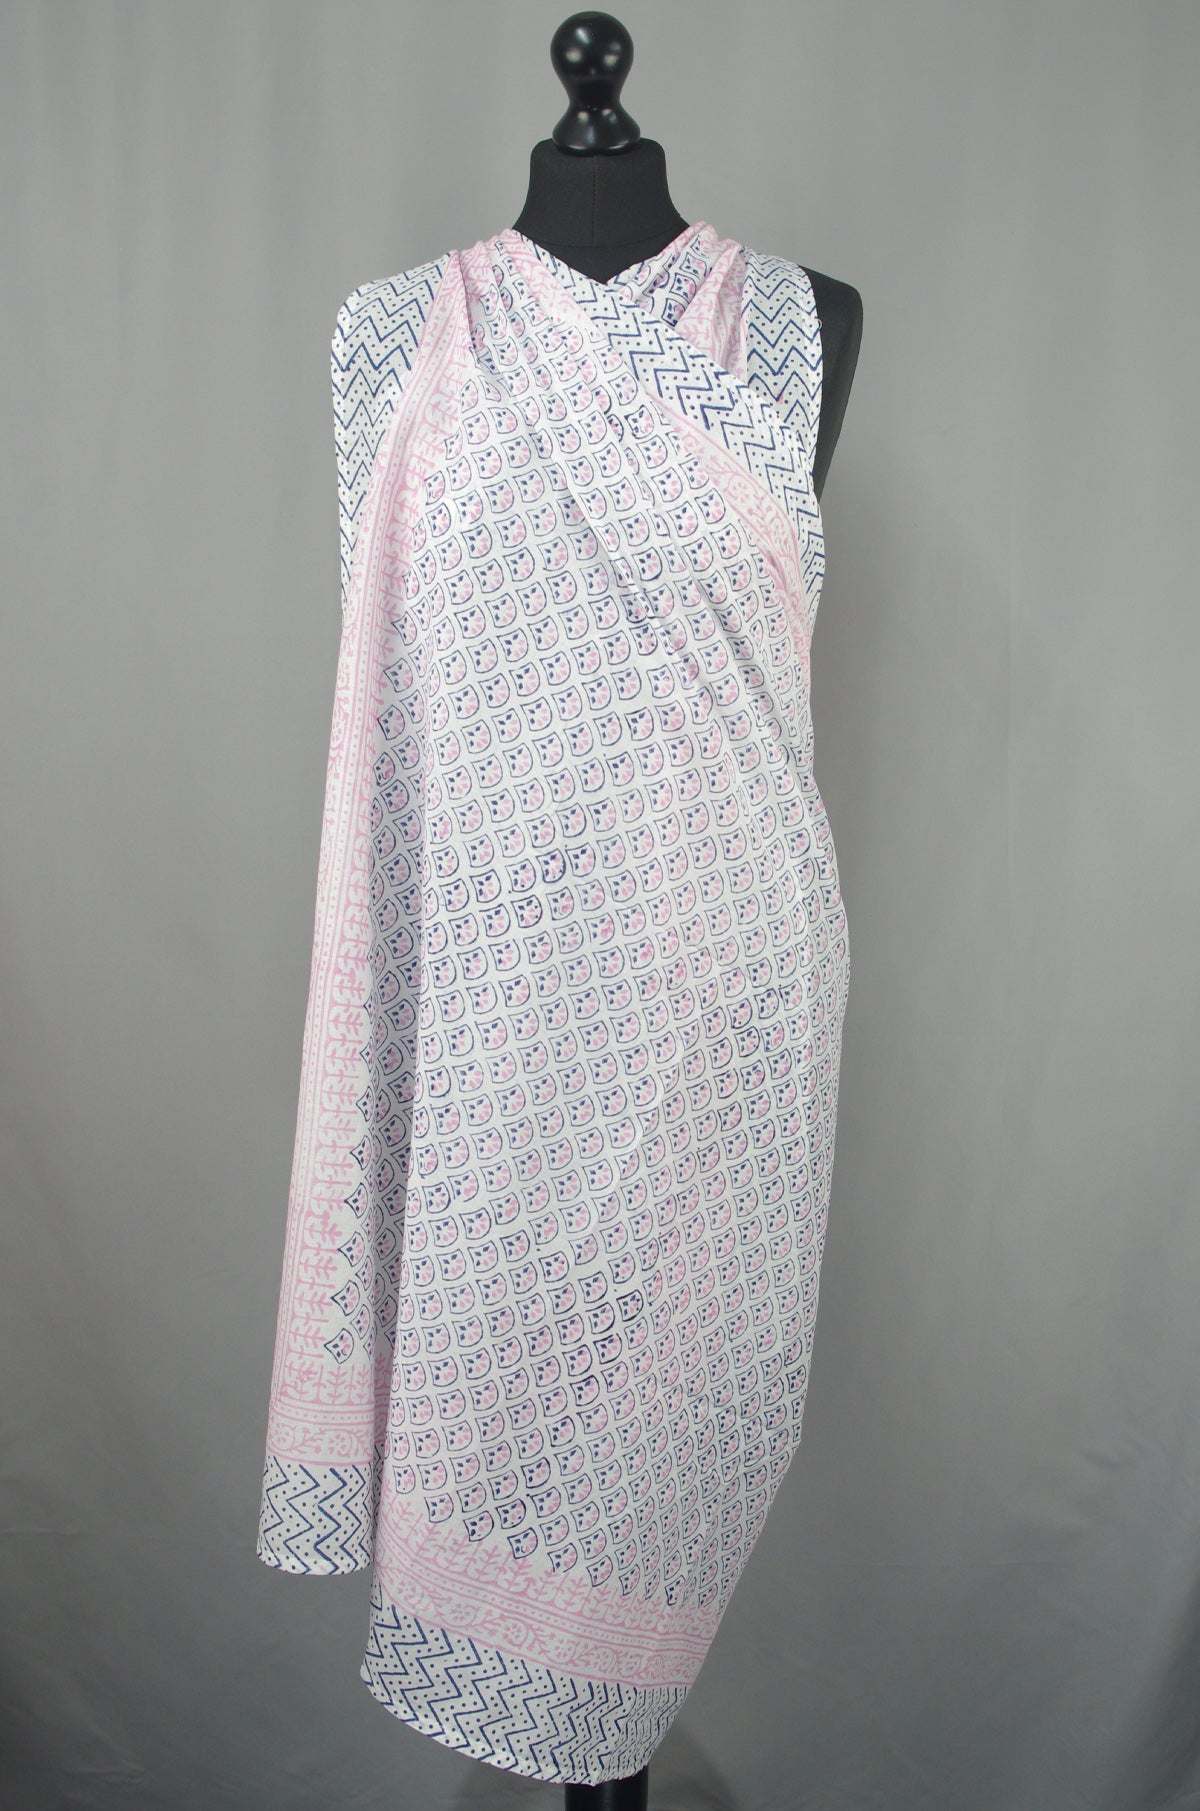 Beach Coverup Sarong Pareo - Fish scale